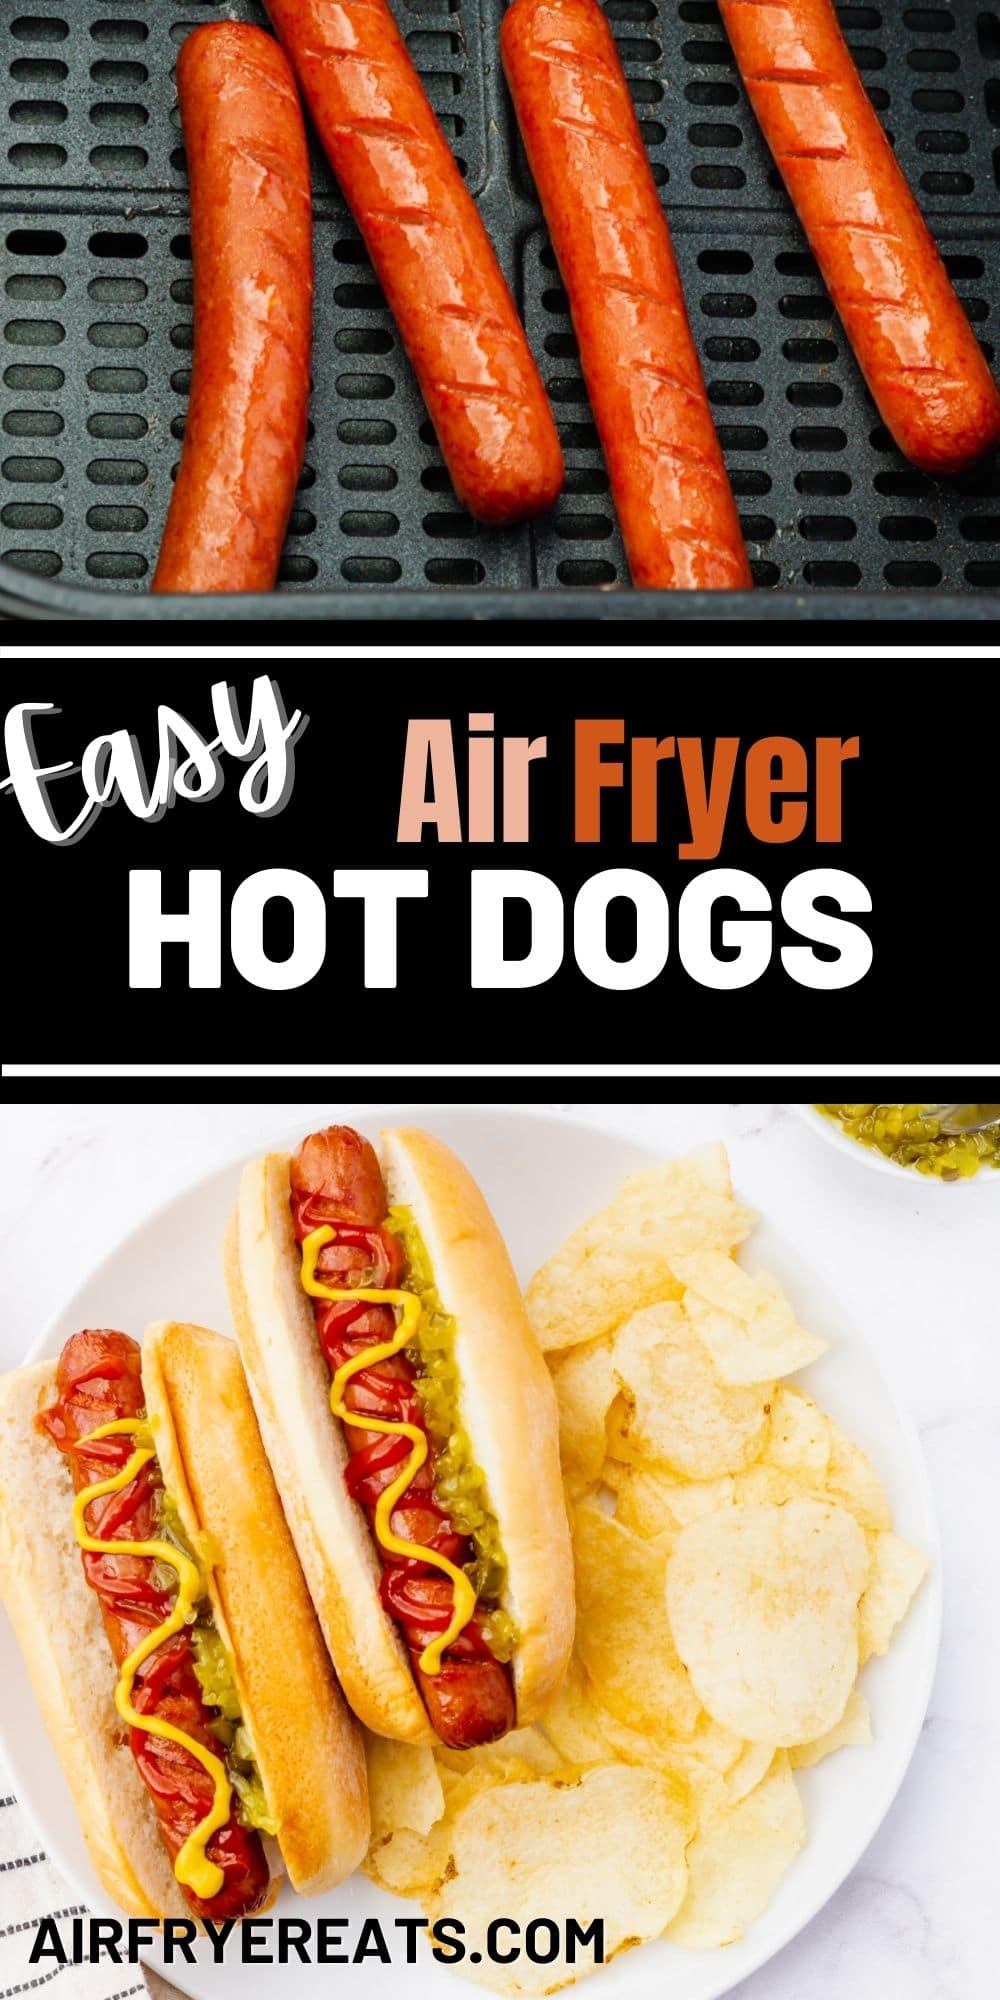 When you want to make a great-tasting hotdog in the comfort of your home, the air fryer is the way to go! Air Fryer Hotdogs get that fresh-from-the-ballpark taste in only 5 minutes! #hotdogs #airfryerhotdogs #frankfurters via @vegetarianmamma